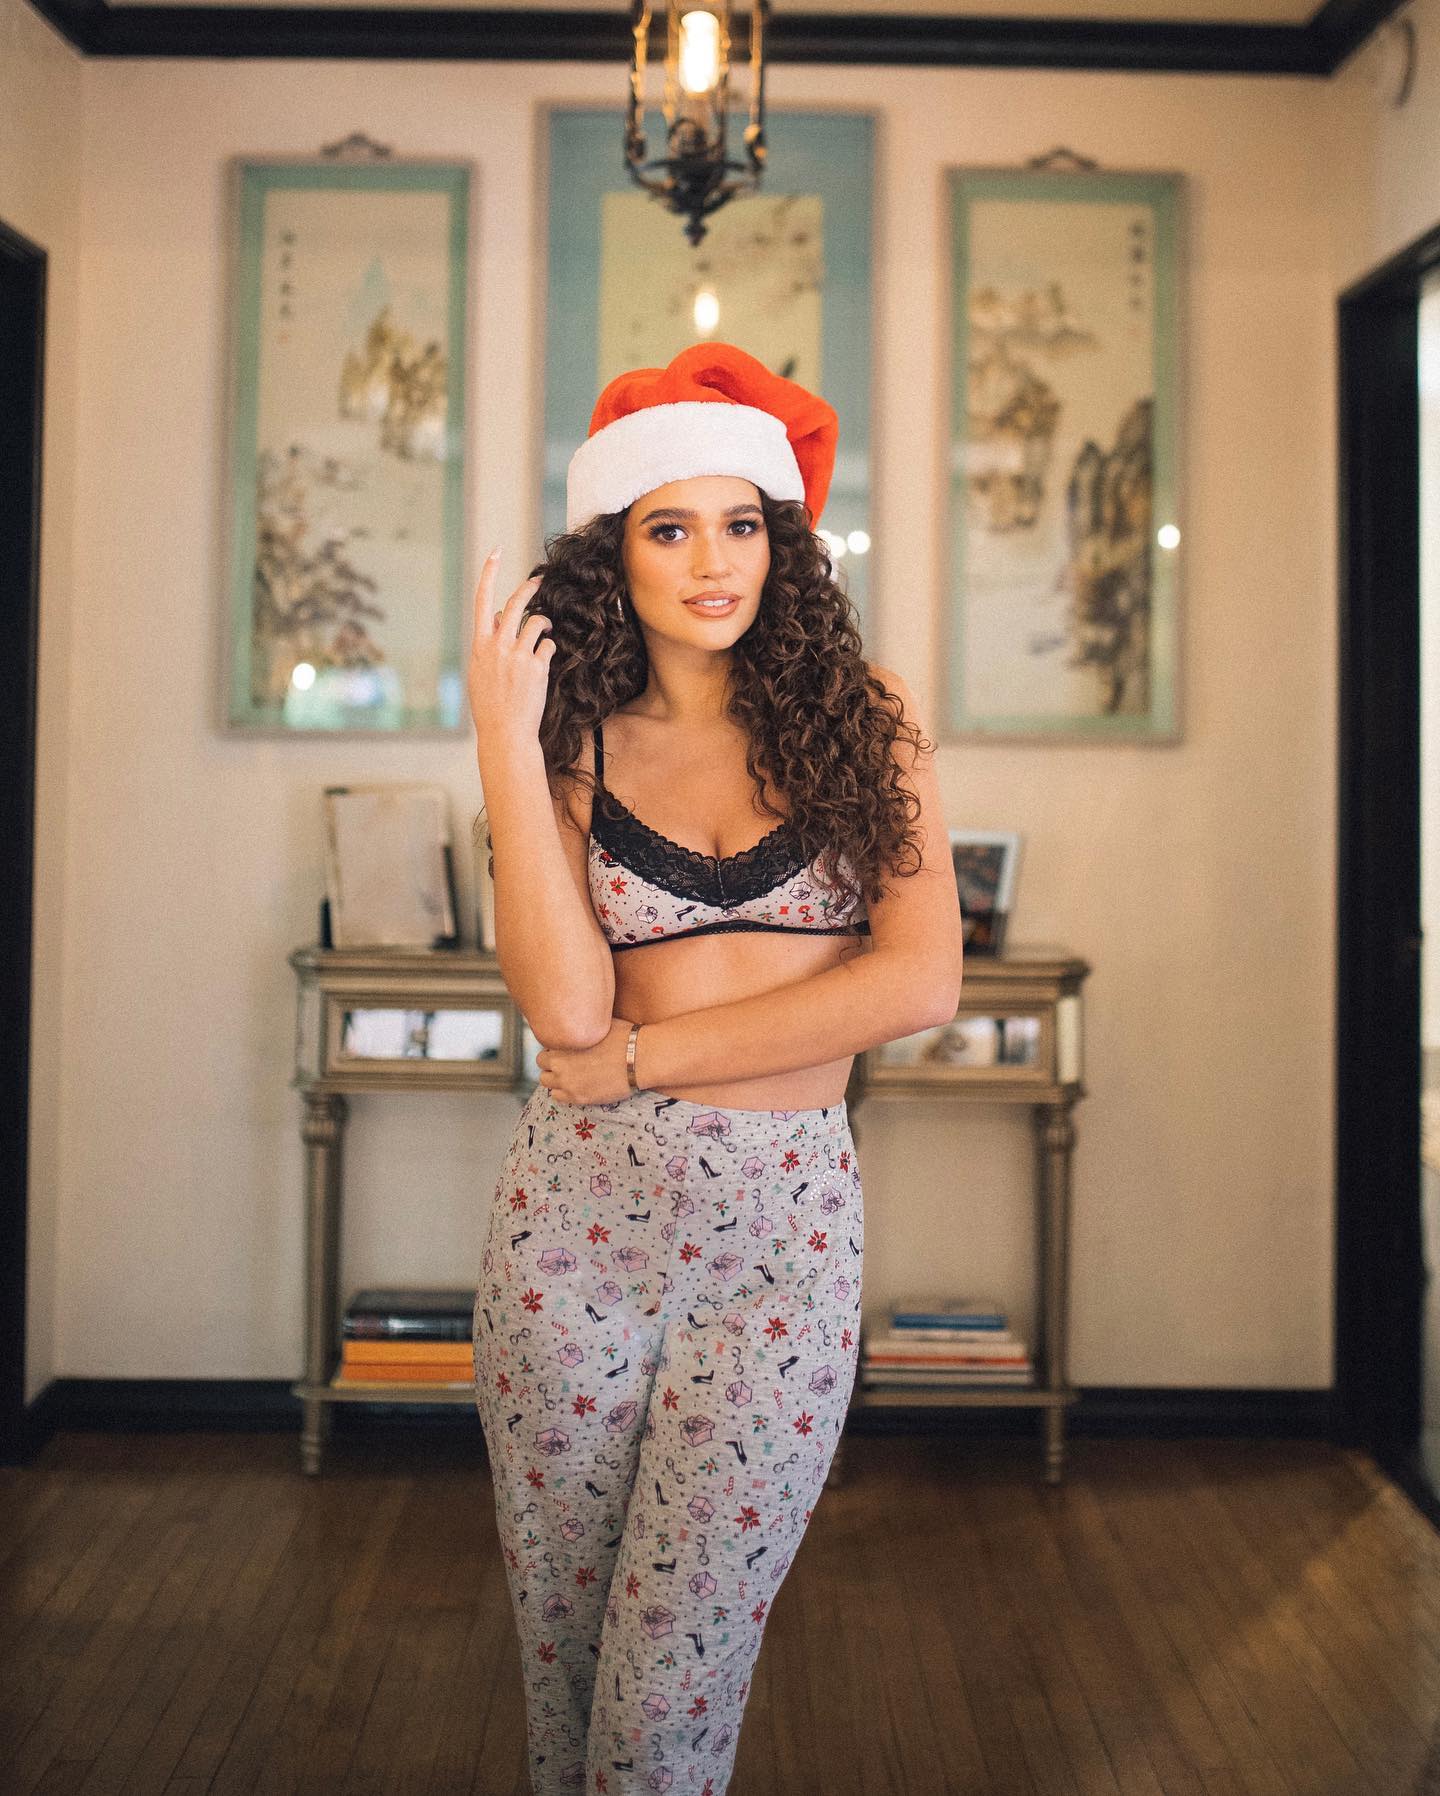 Madison Pettis Gets Sexy for Christmas! - Photo 9